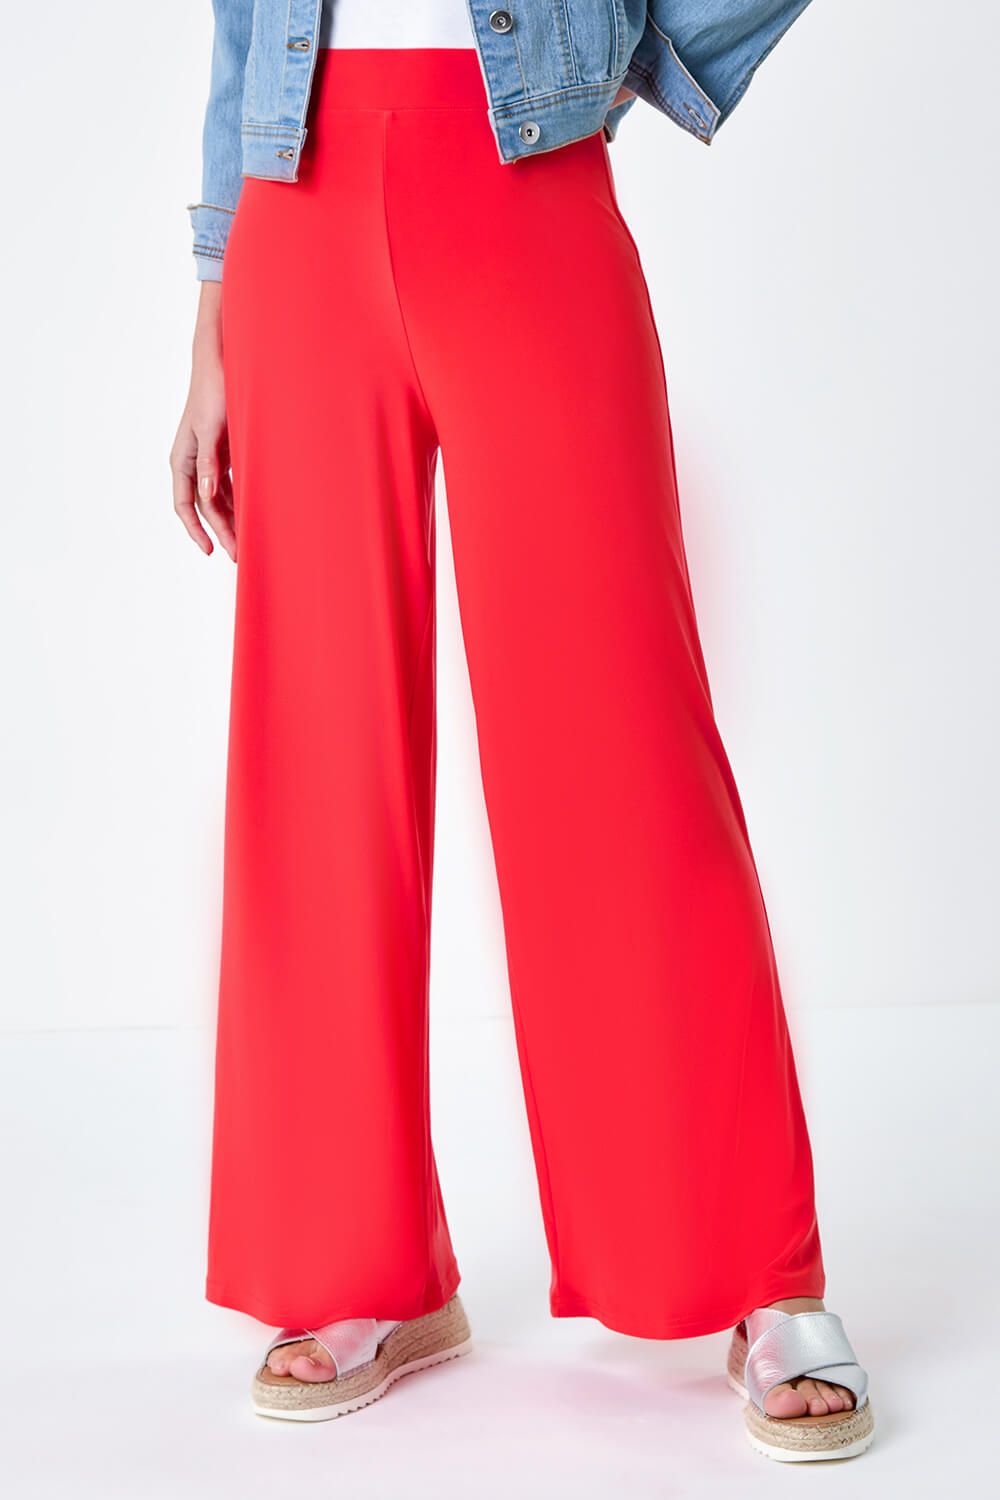 ORANGE Wide Leg Stretch Trousers, Image 4 of 5